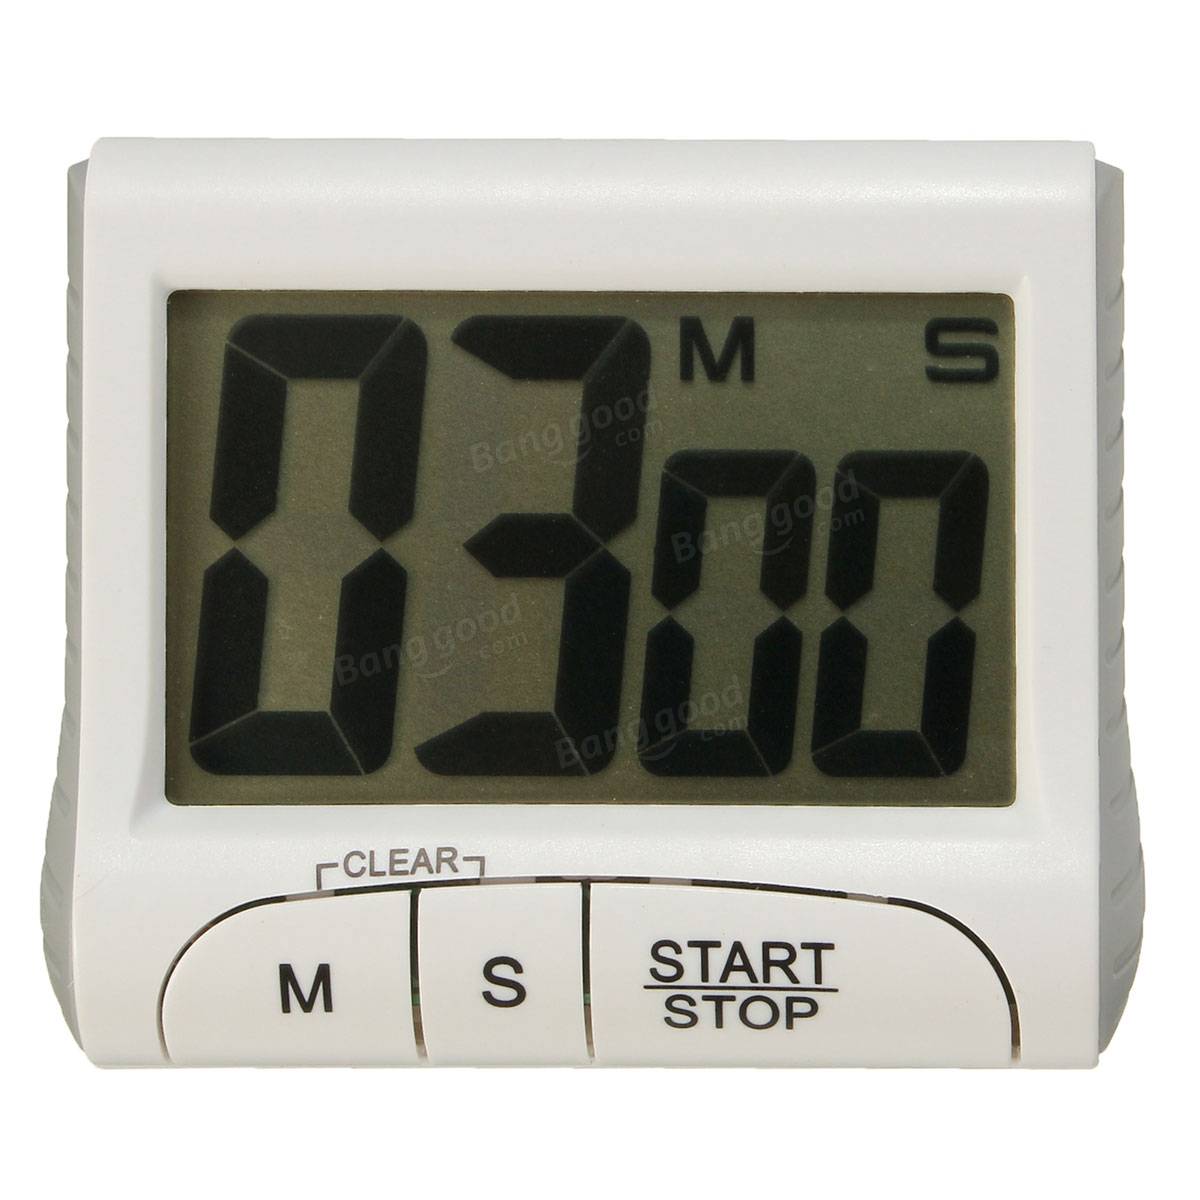 Digital LCD Electronic Timer Stopwatch Countdown Count Up Magnetic Sale - Banggood.com1200 x 1200